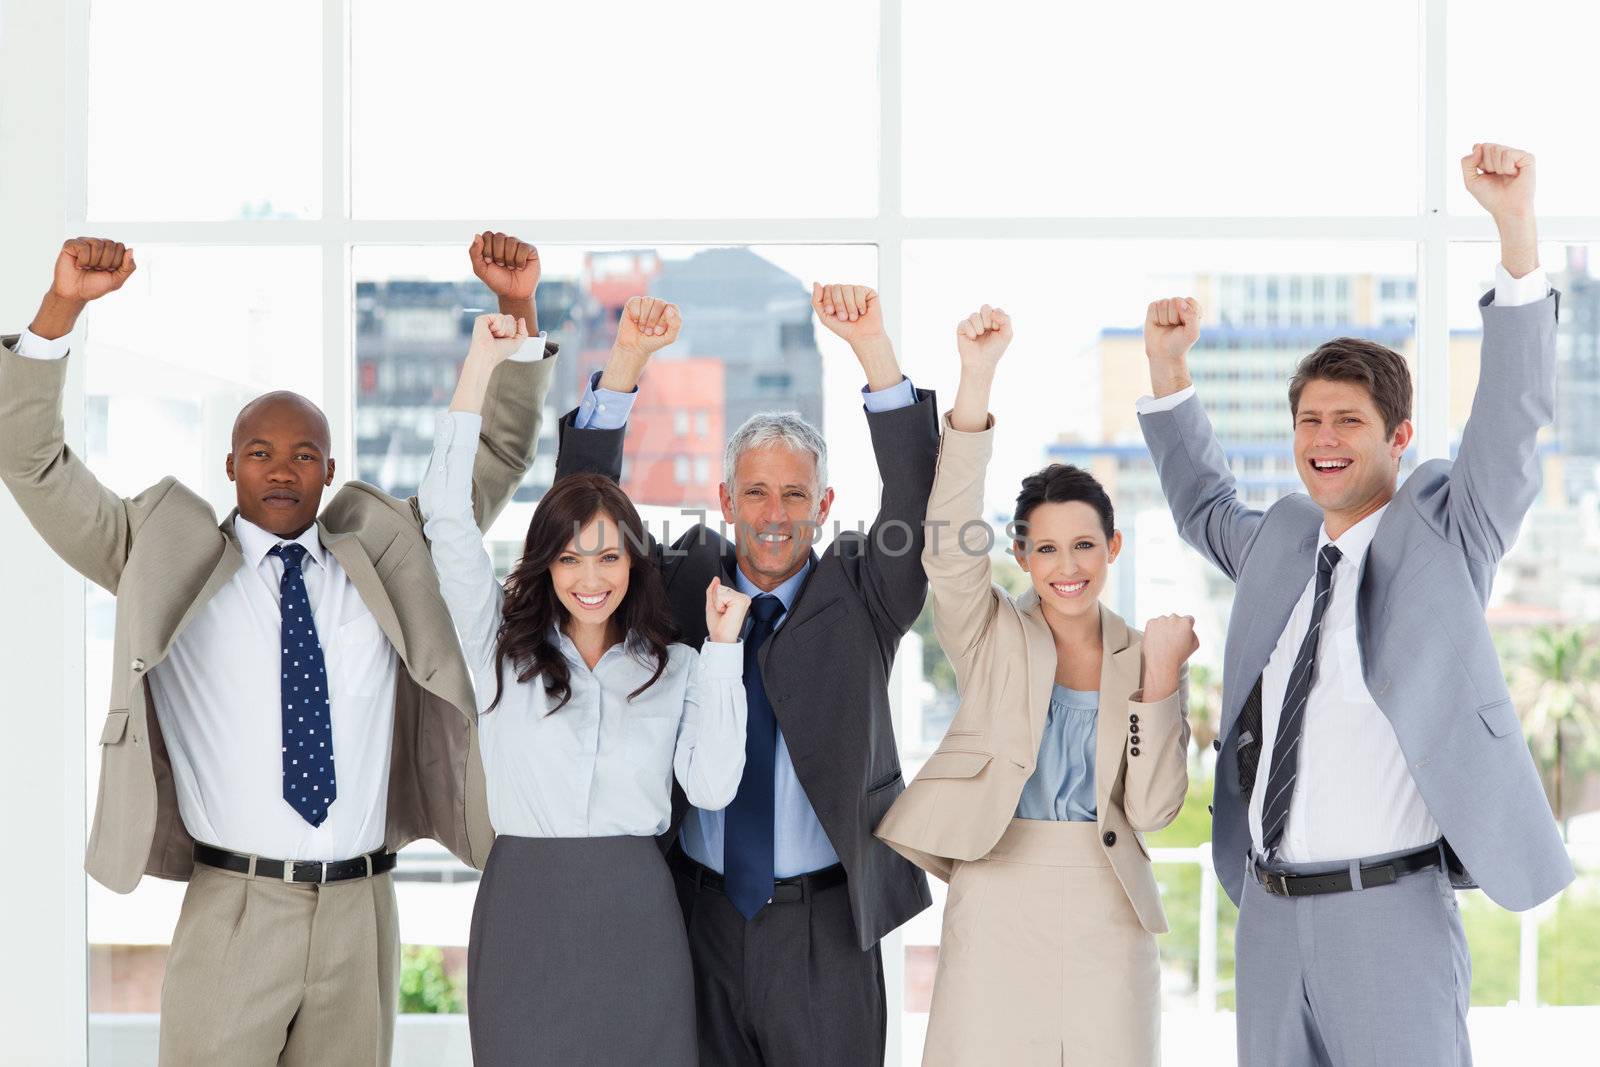 Business team smiling and standing upright with arms raised in success